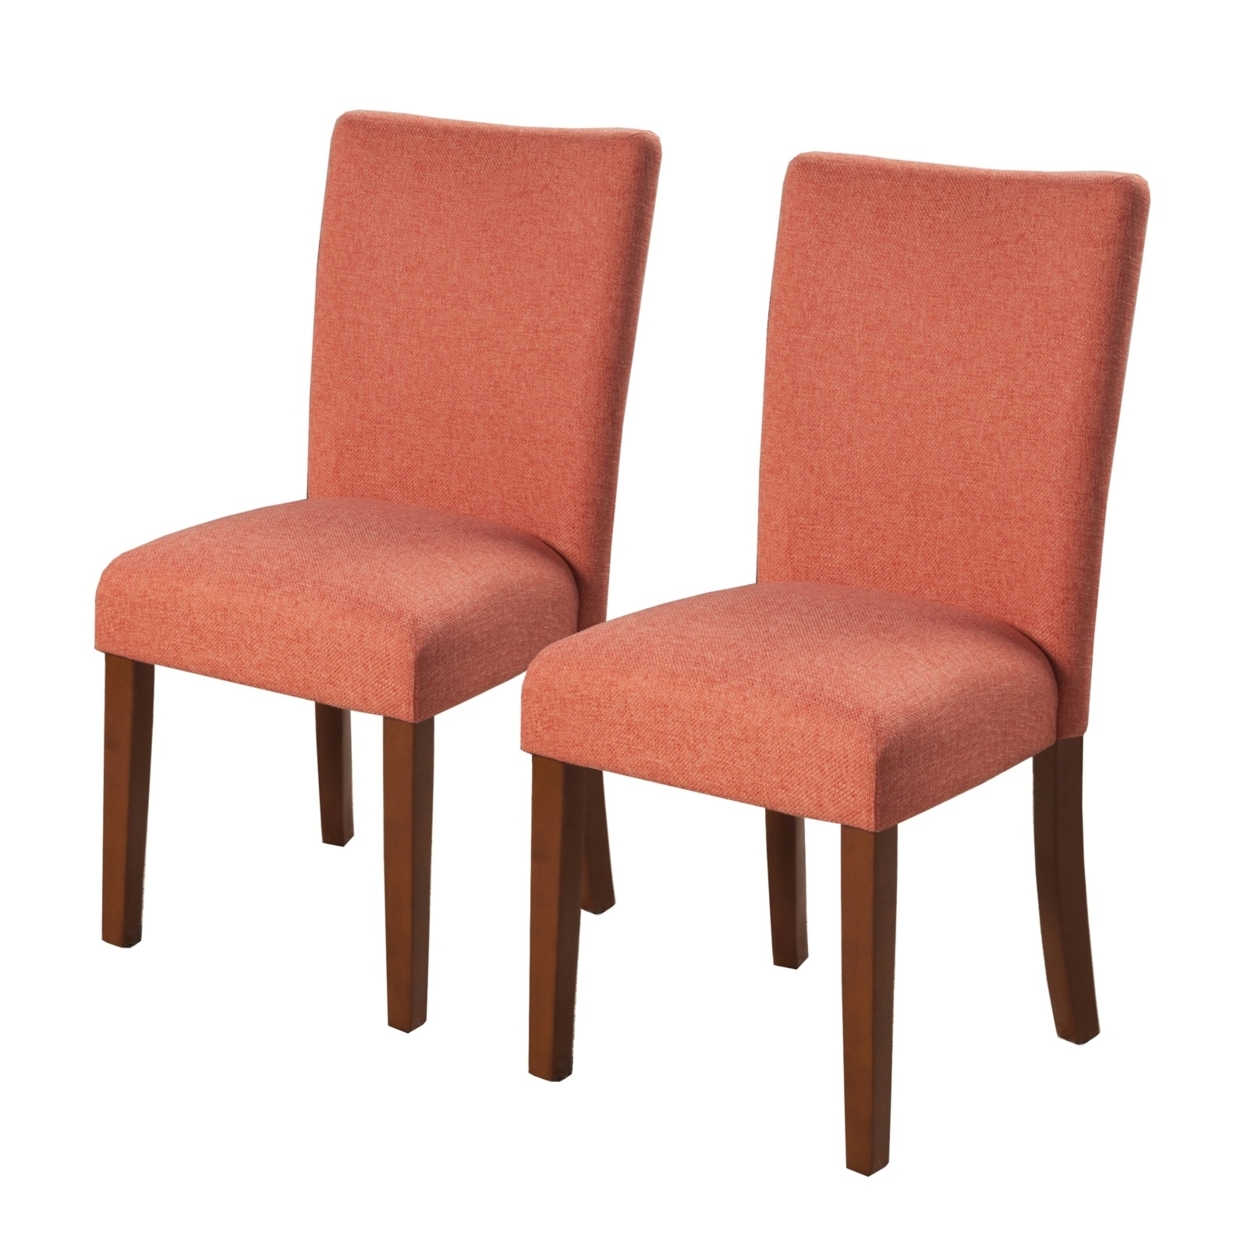 Fabric Upholstered Parson Dining Chair With Wooden Legs, Orange And Brown, Set Of Two- Saltoro Sherpi